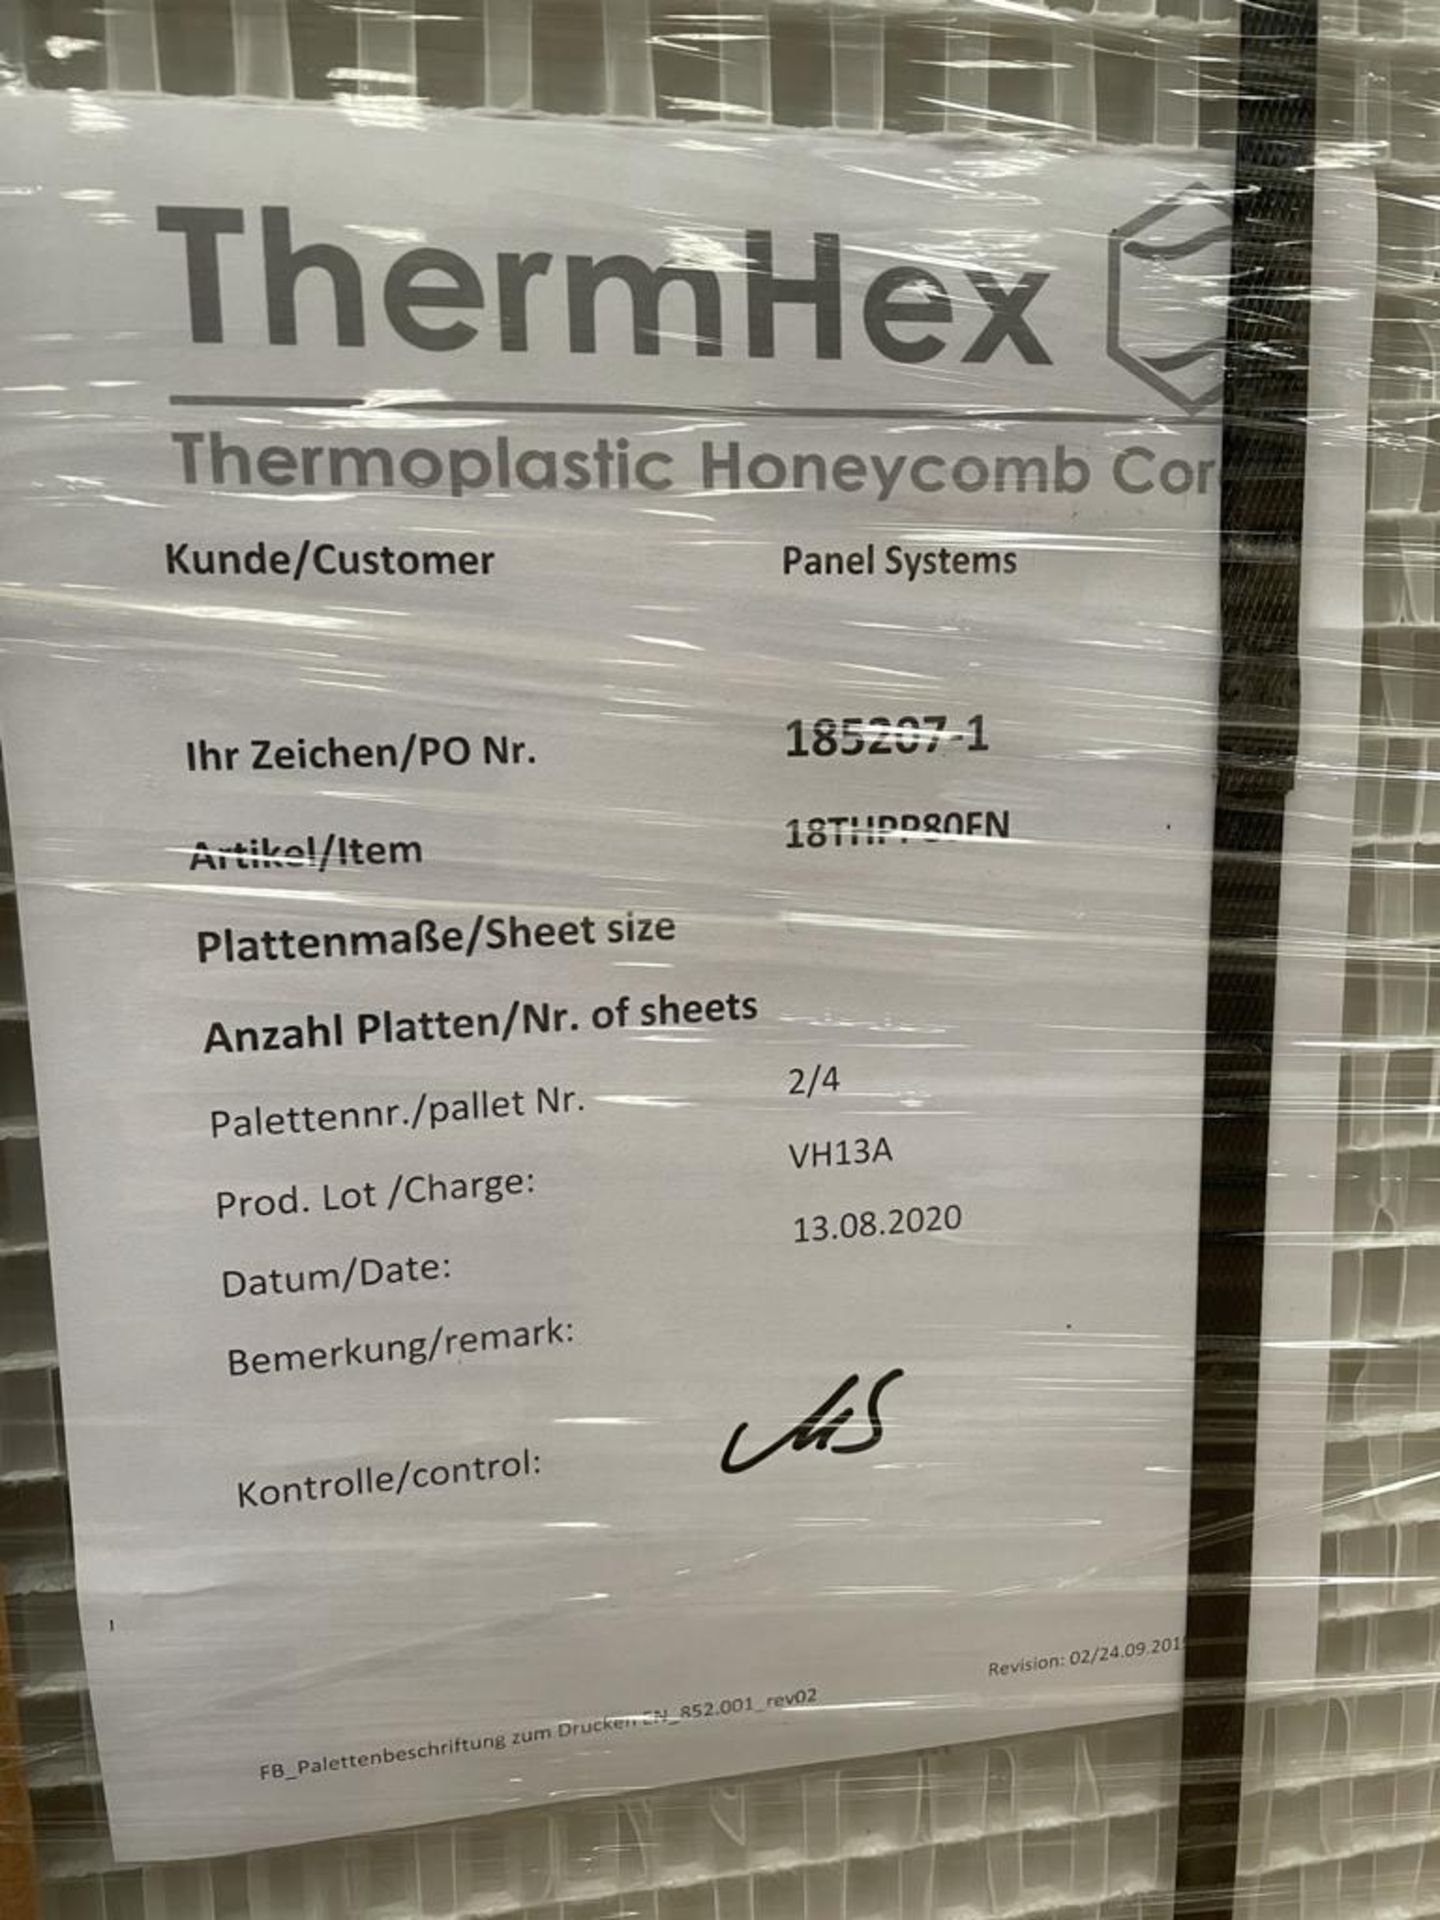 100 x ThermHex Thermoplastic Honeycomb Core Panels - Size: 3175 x 1210 x 20mm - New Stock - Lightwe - Image 8 of 8